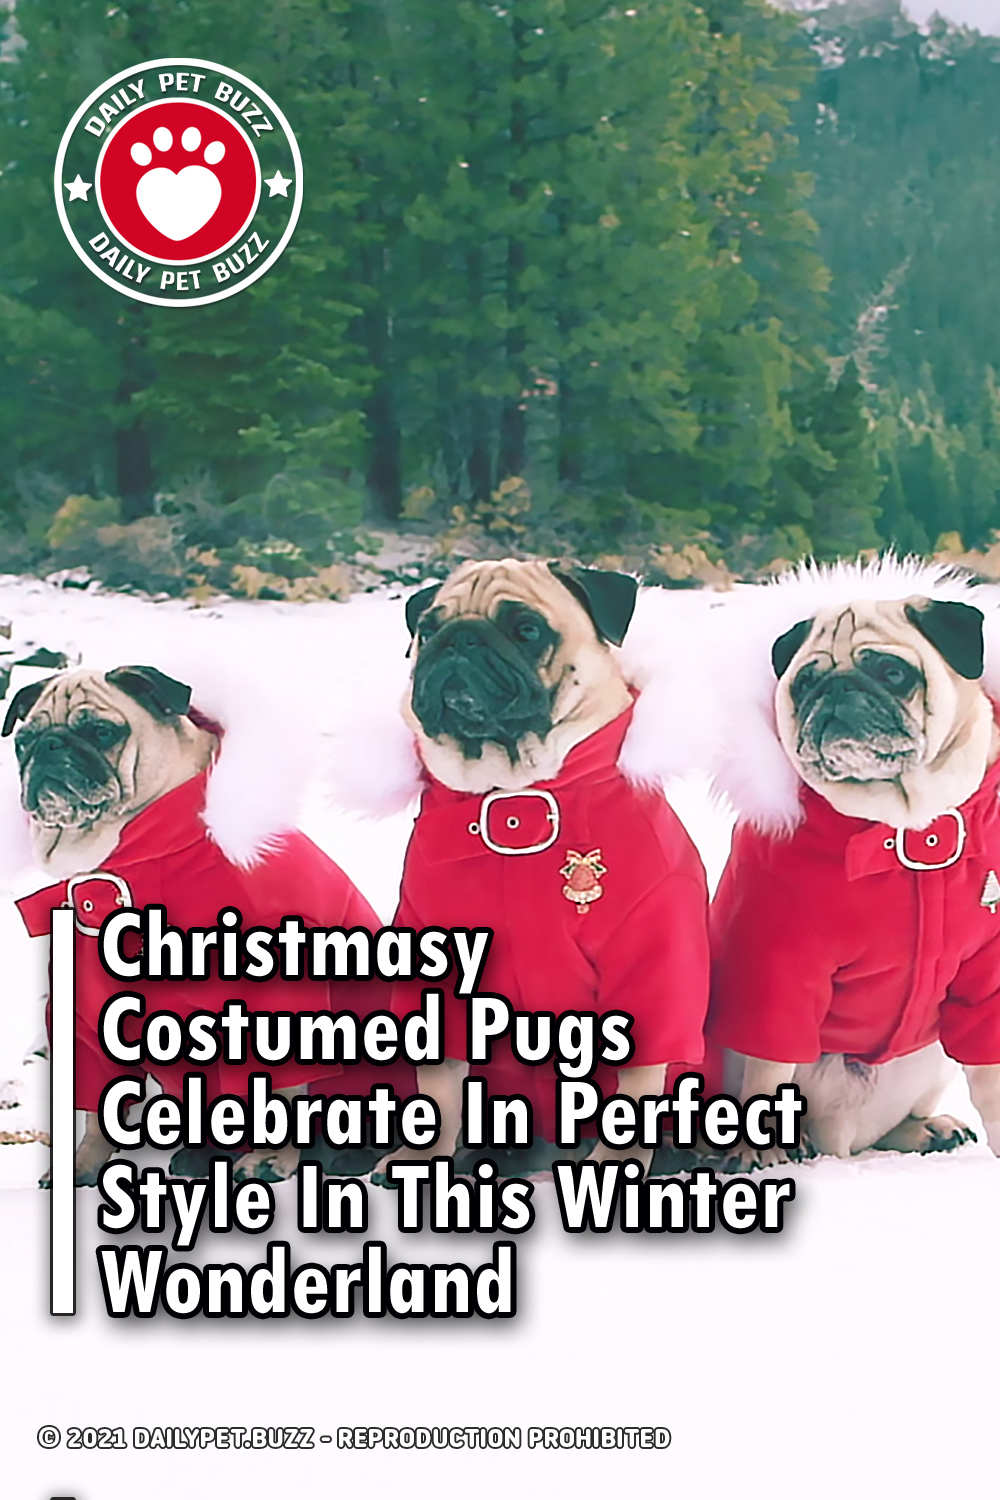 Christmasy Costumed Pugs Celebrate In Perfect Style In This Winter Wonderland